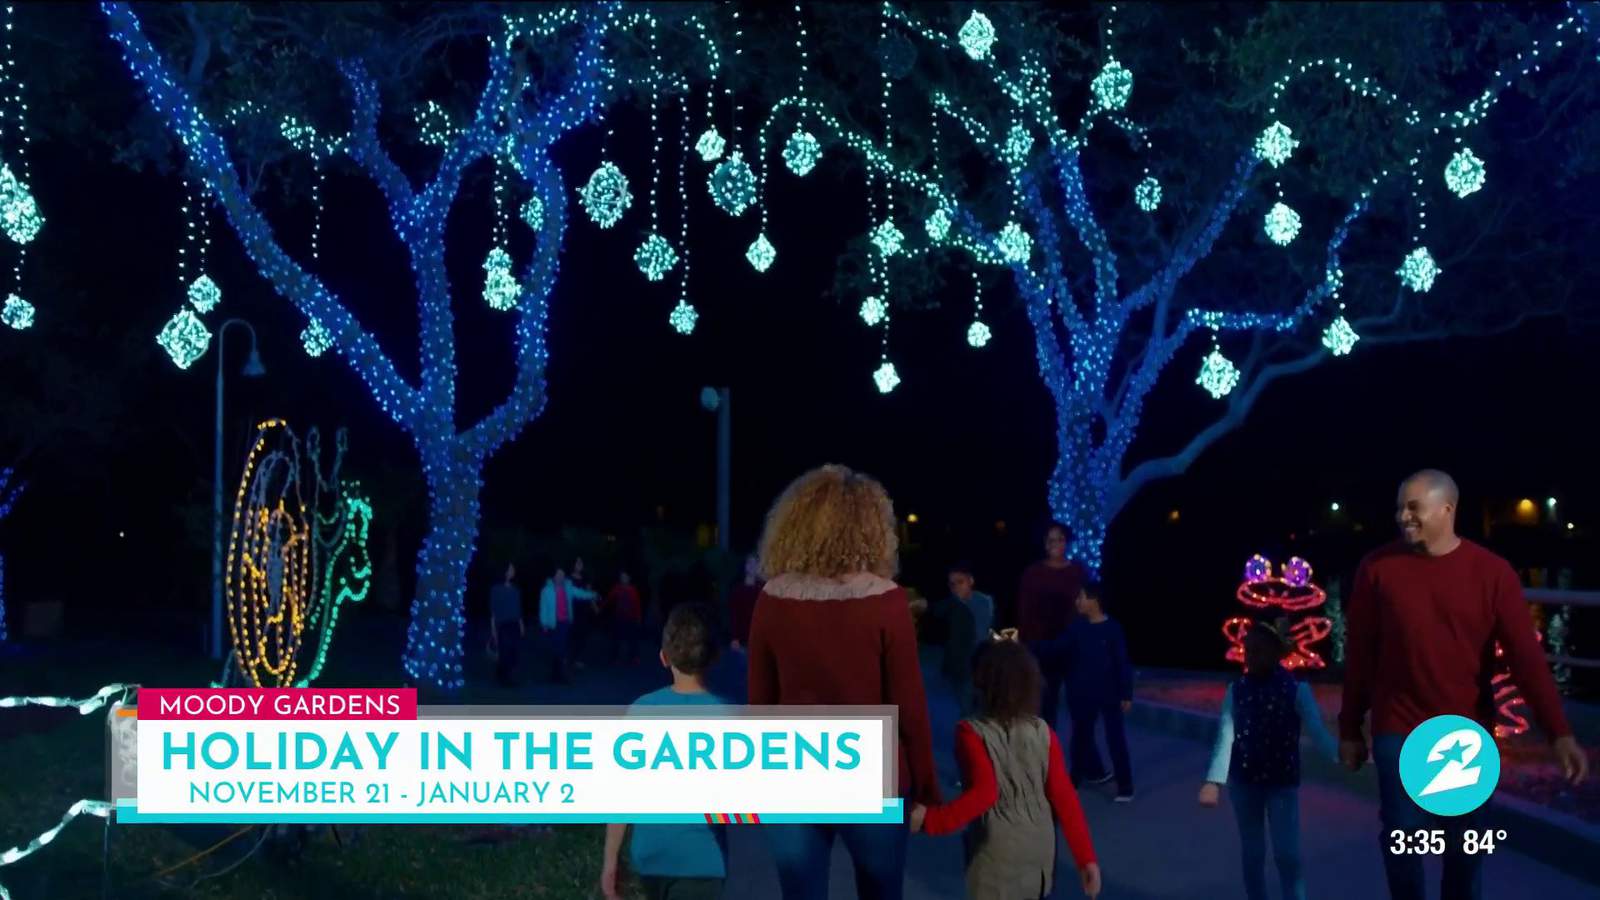 Here are 7 holiday attractions you can find at Galveston’s Moody Gardens